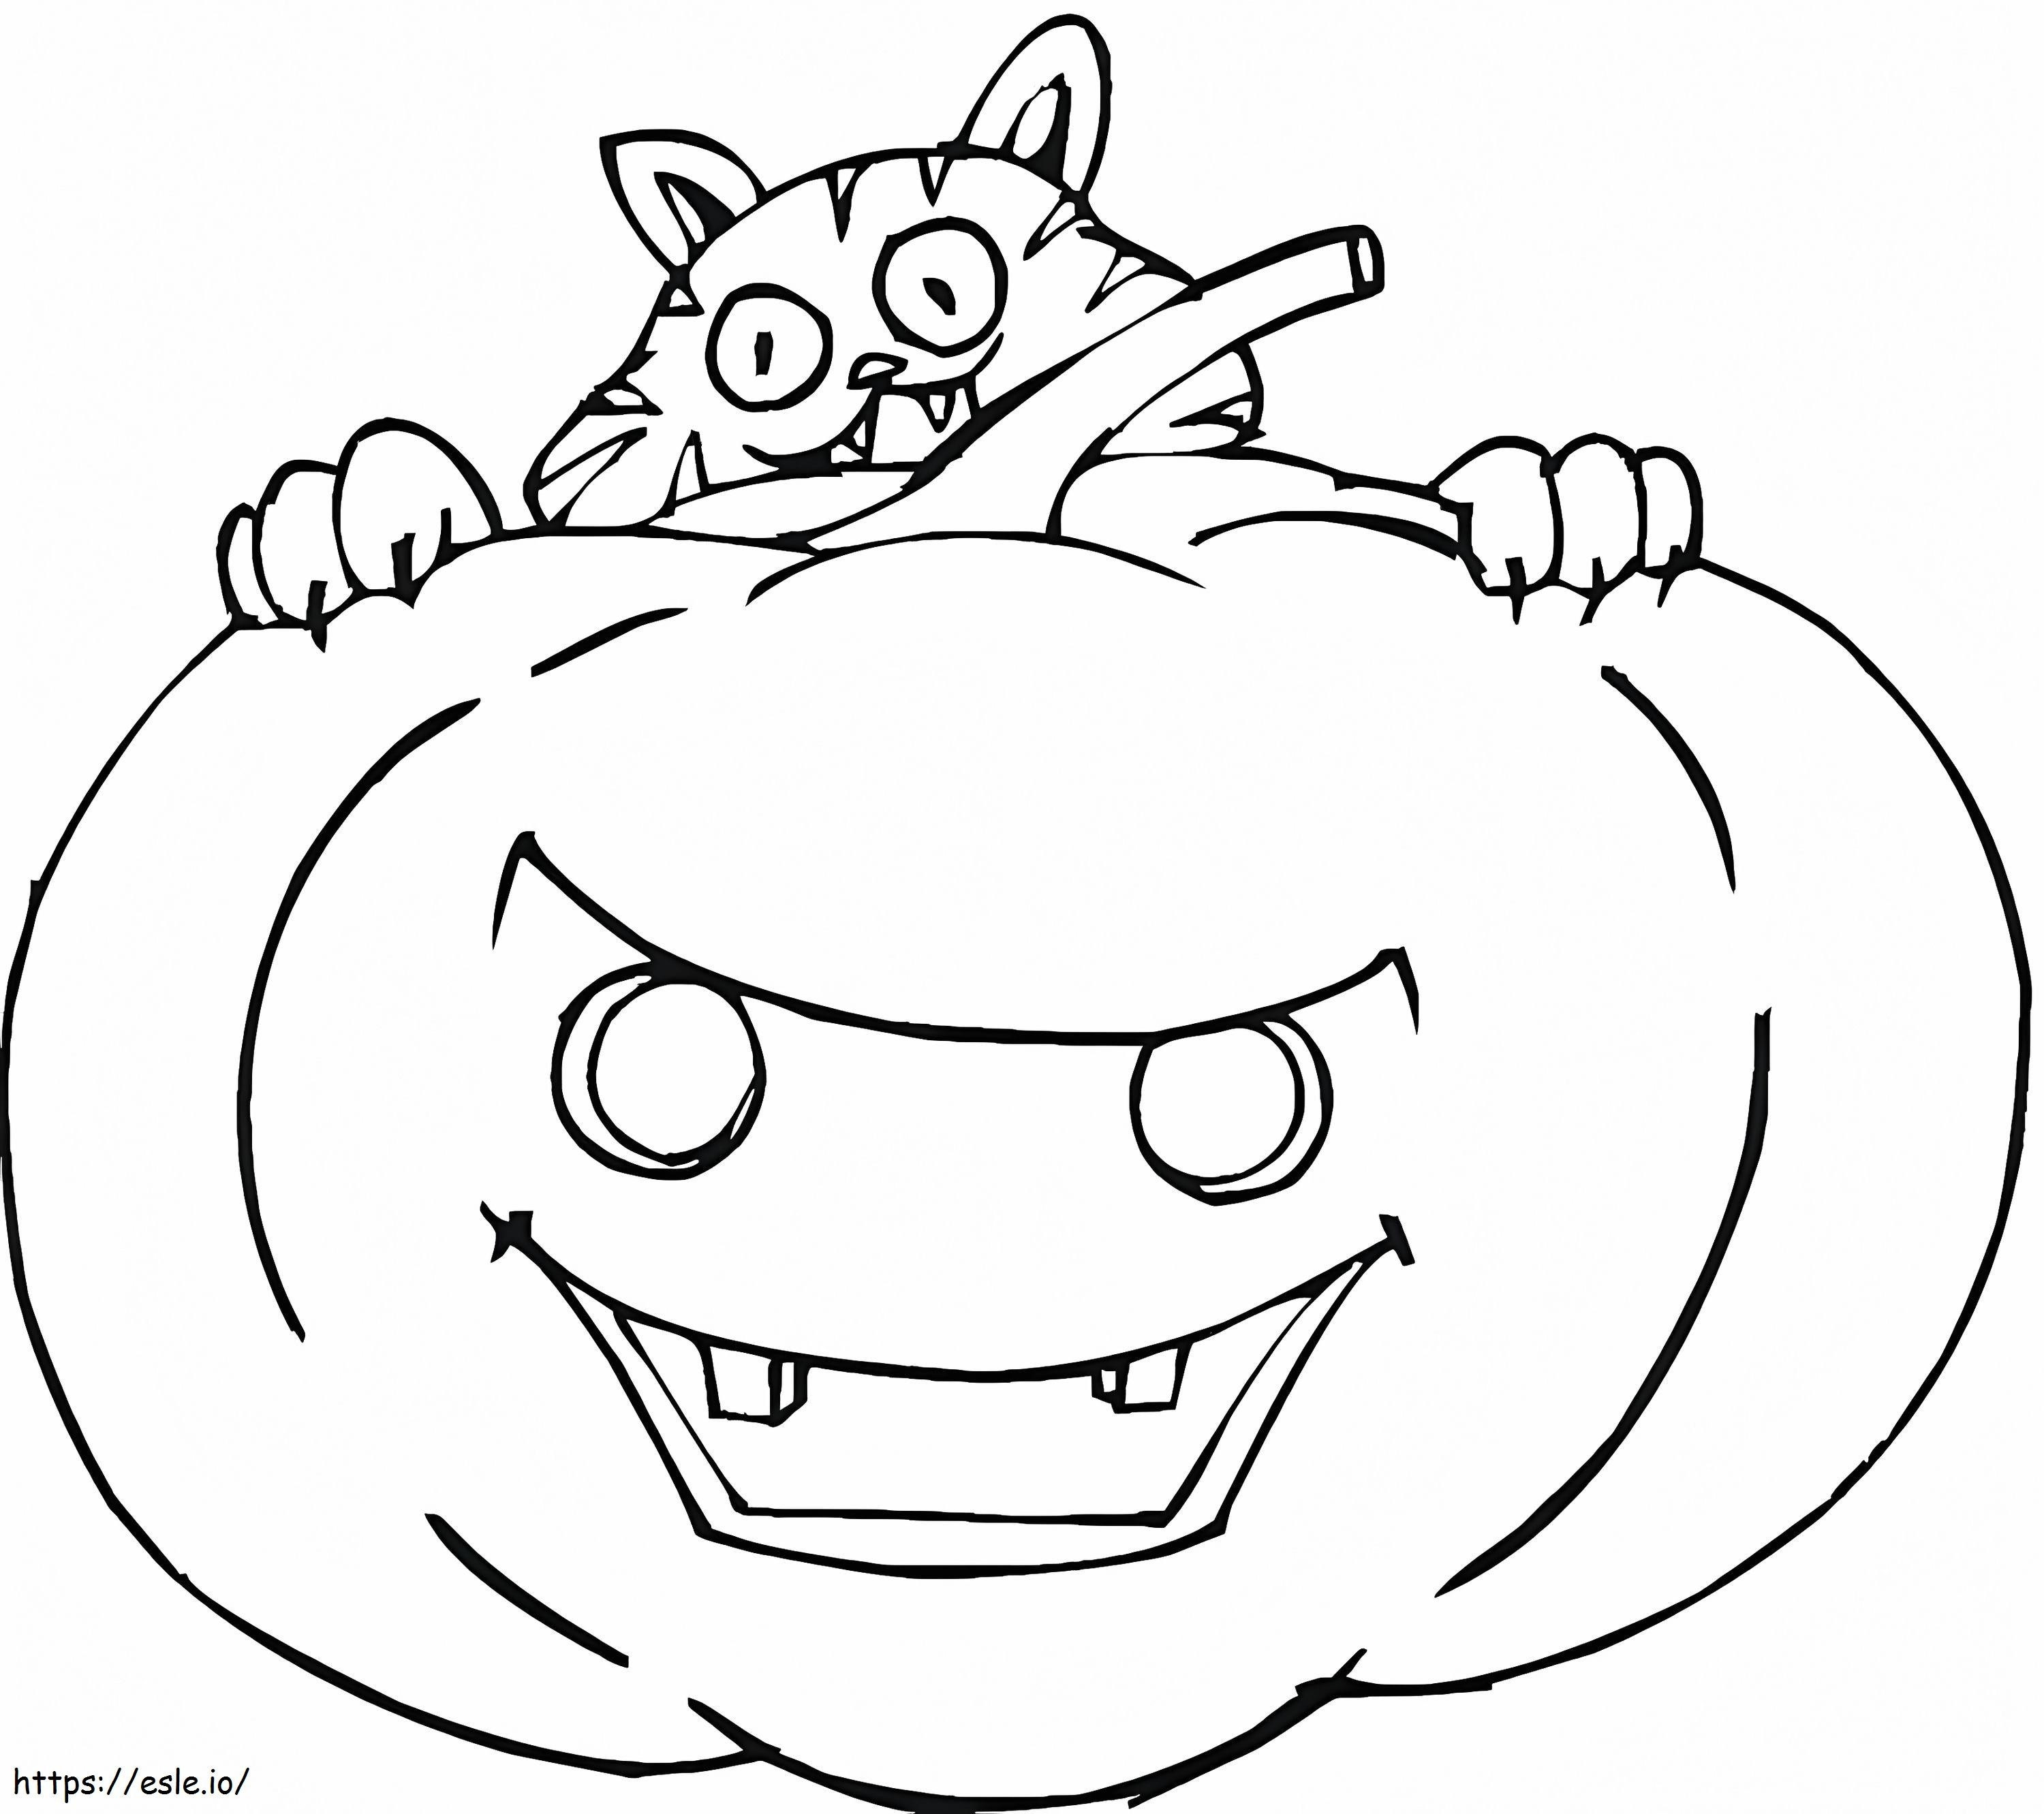 Halloween Crazy Cat And Pumpkin coloring page